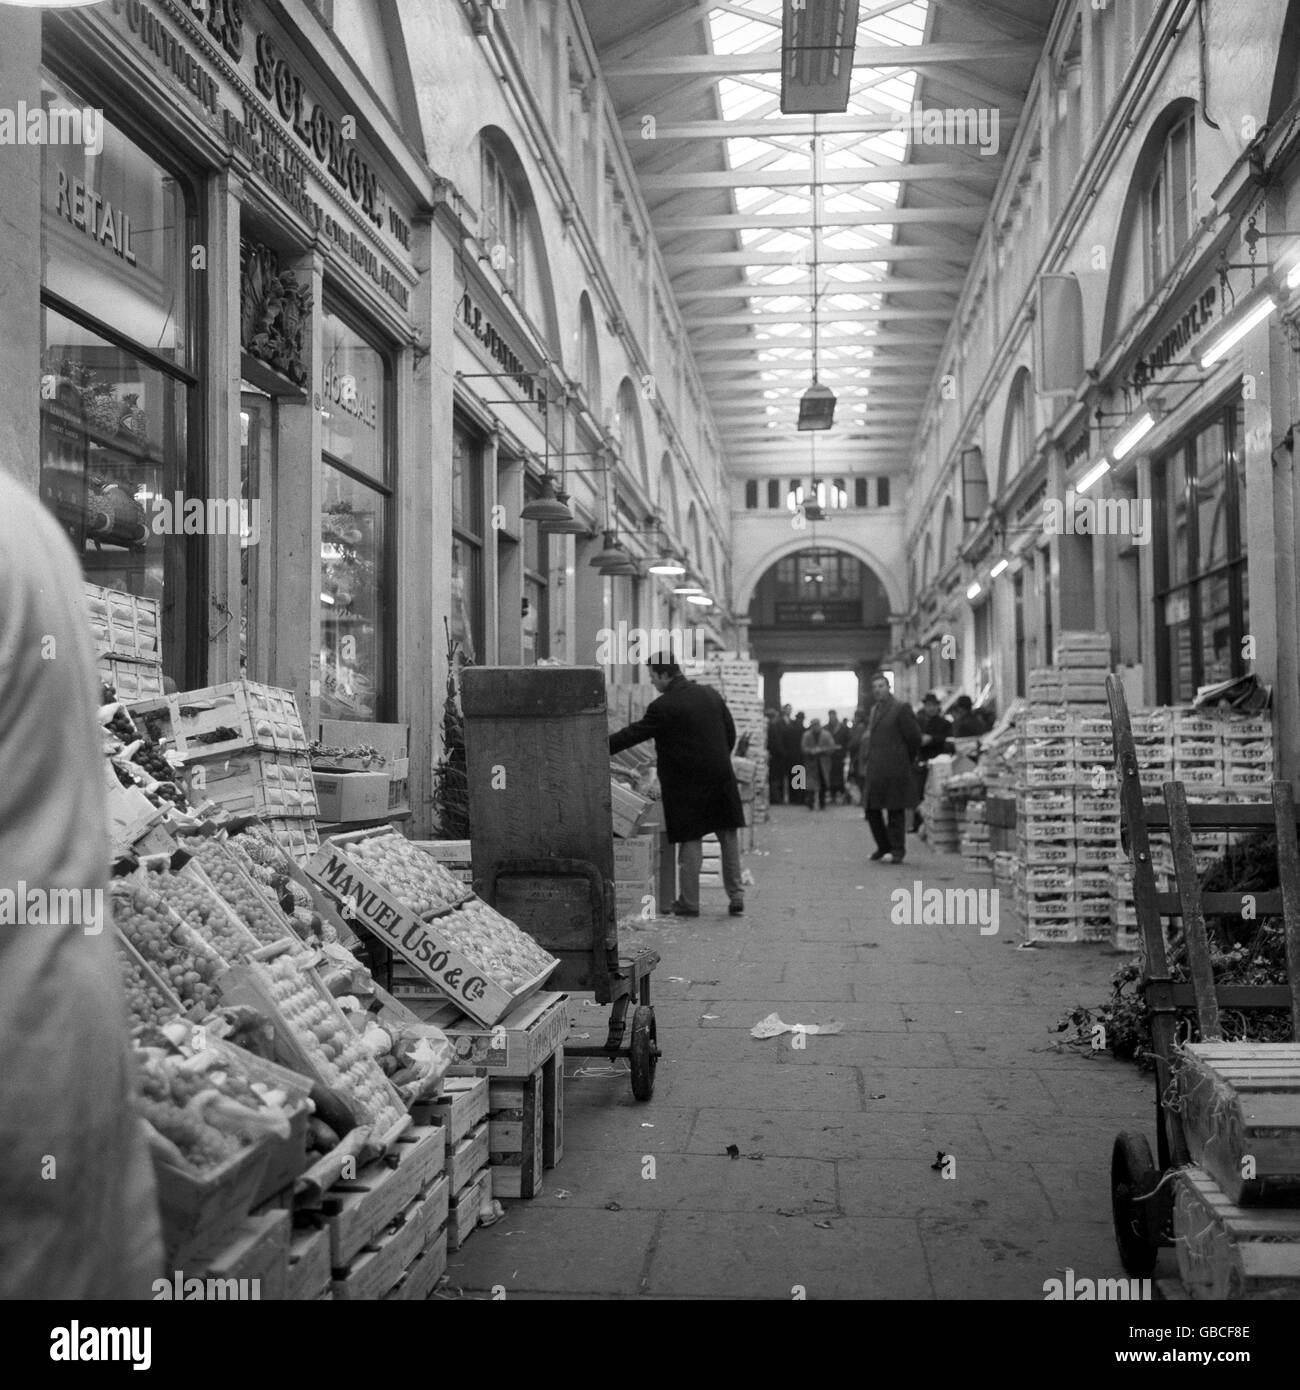 A picture of the 19th century market building in London's Covent Garden. Stock Photo